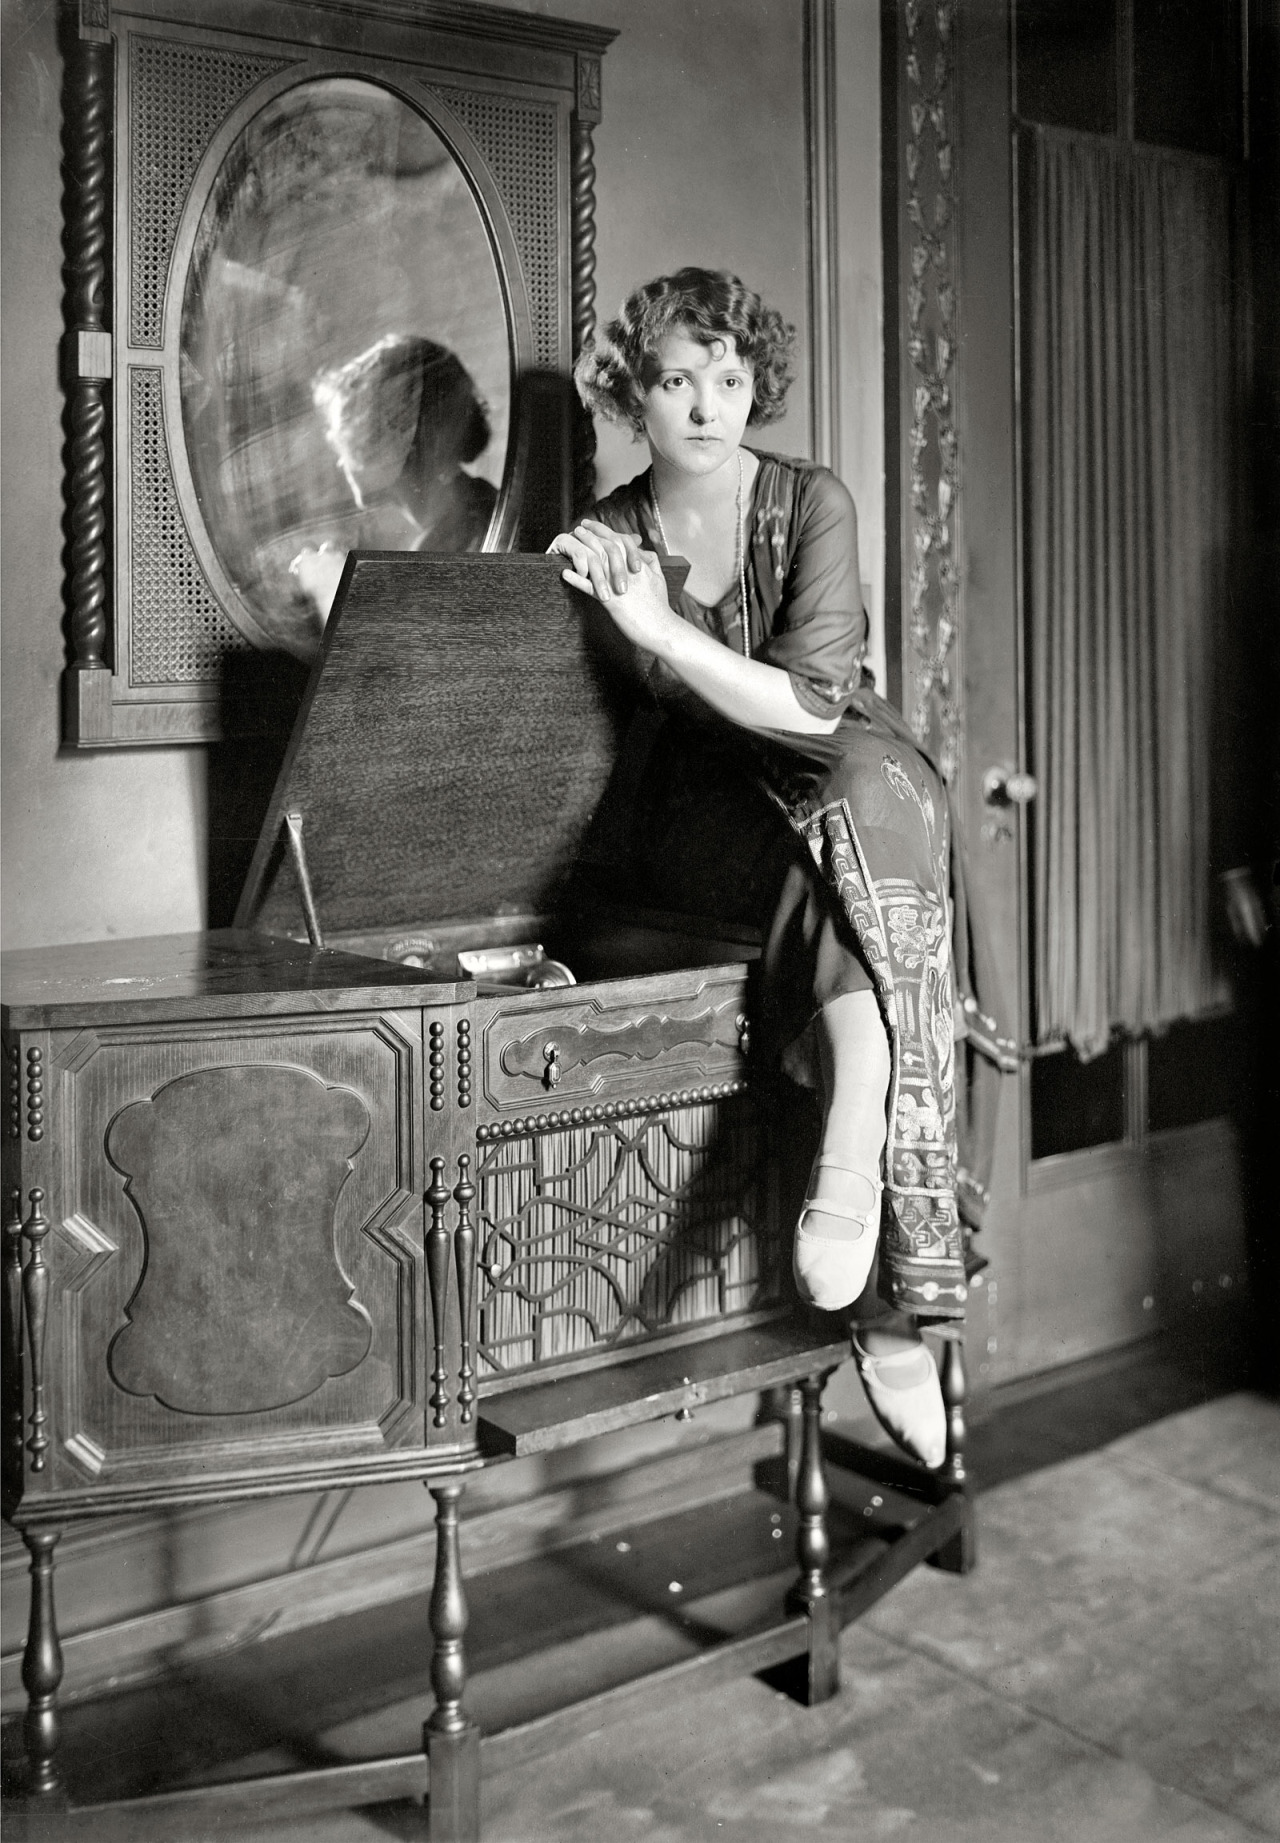 vinylespassion:
“ A lady and her phonograph, New York, circa 1921.
”